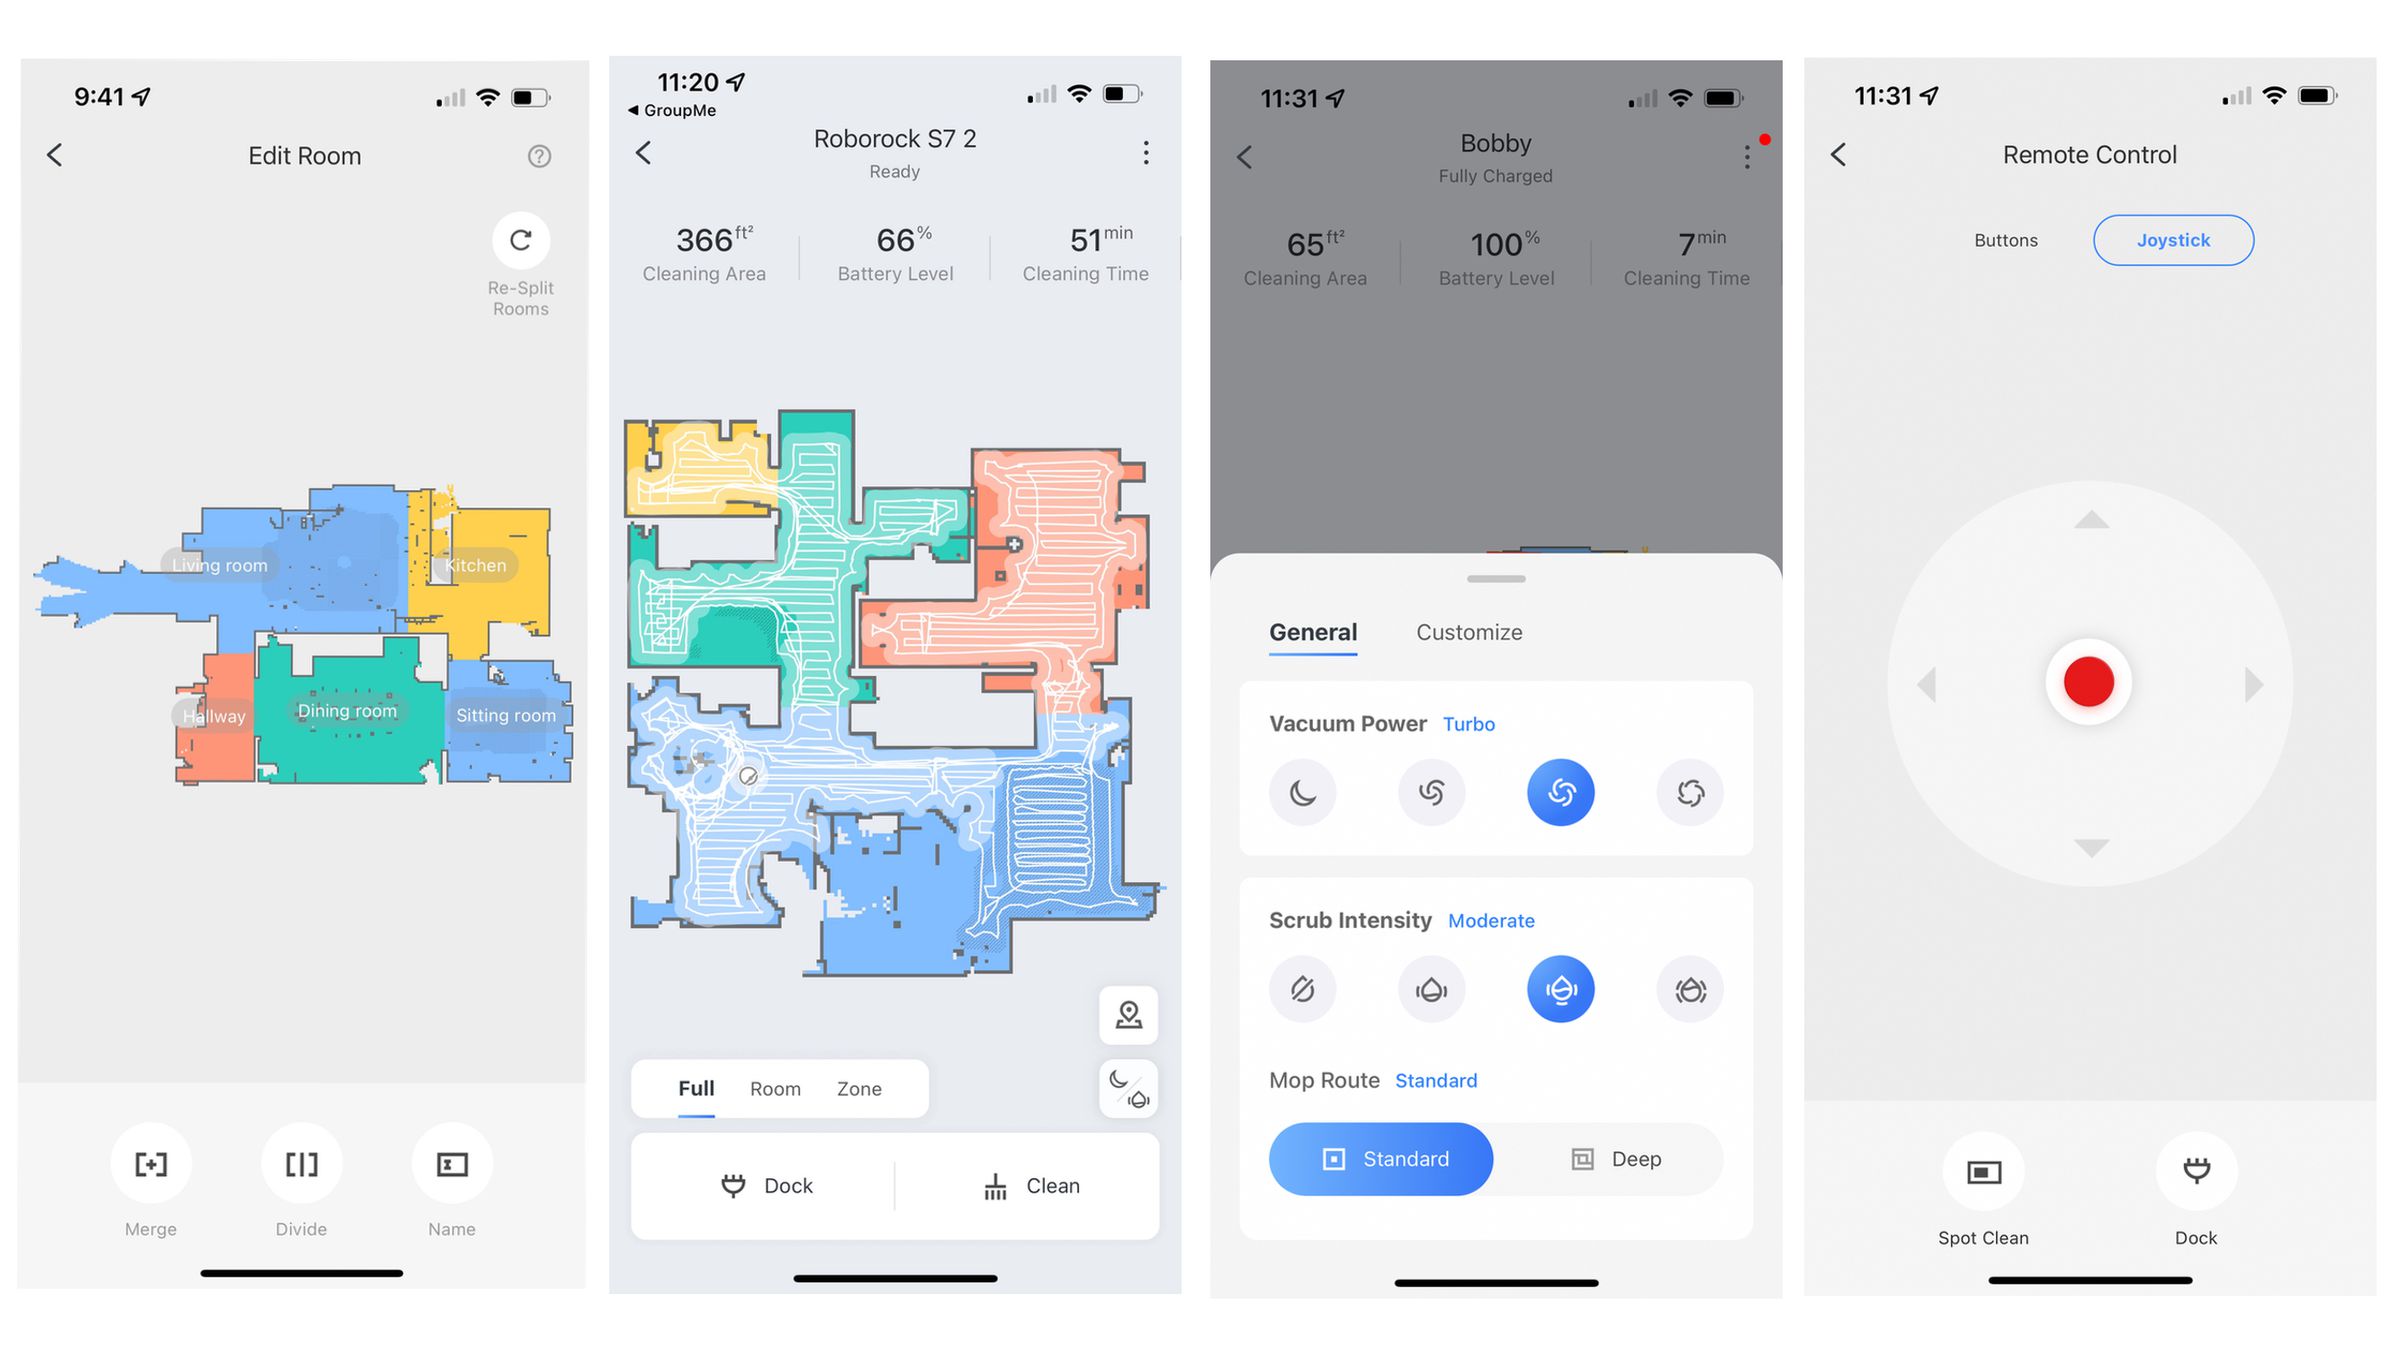 The Roborock app has multi-level mapping with room identification and a real-time navigation view. You can customize how the vacuum cleans, and even control it with a joystick feature so you can harass your cat.